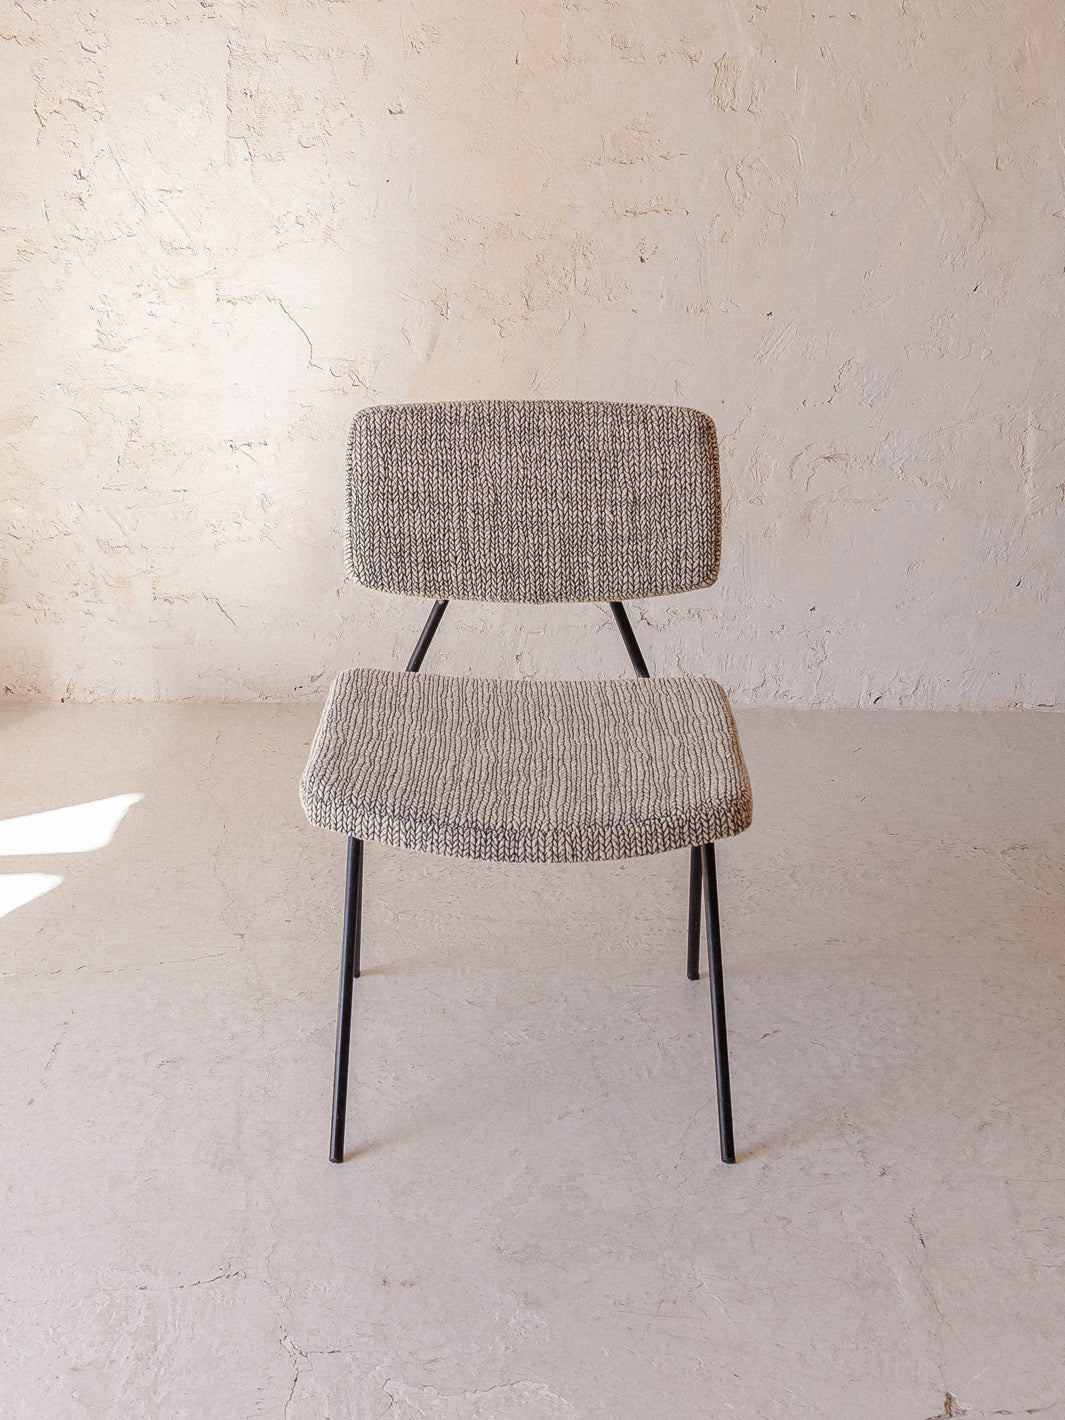 Pierre Guariche armchair chair from the 60s